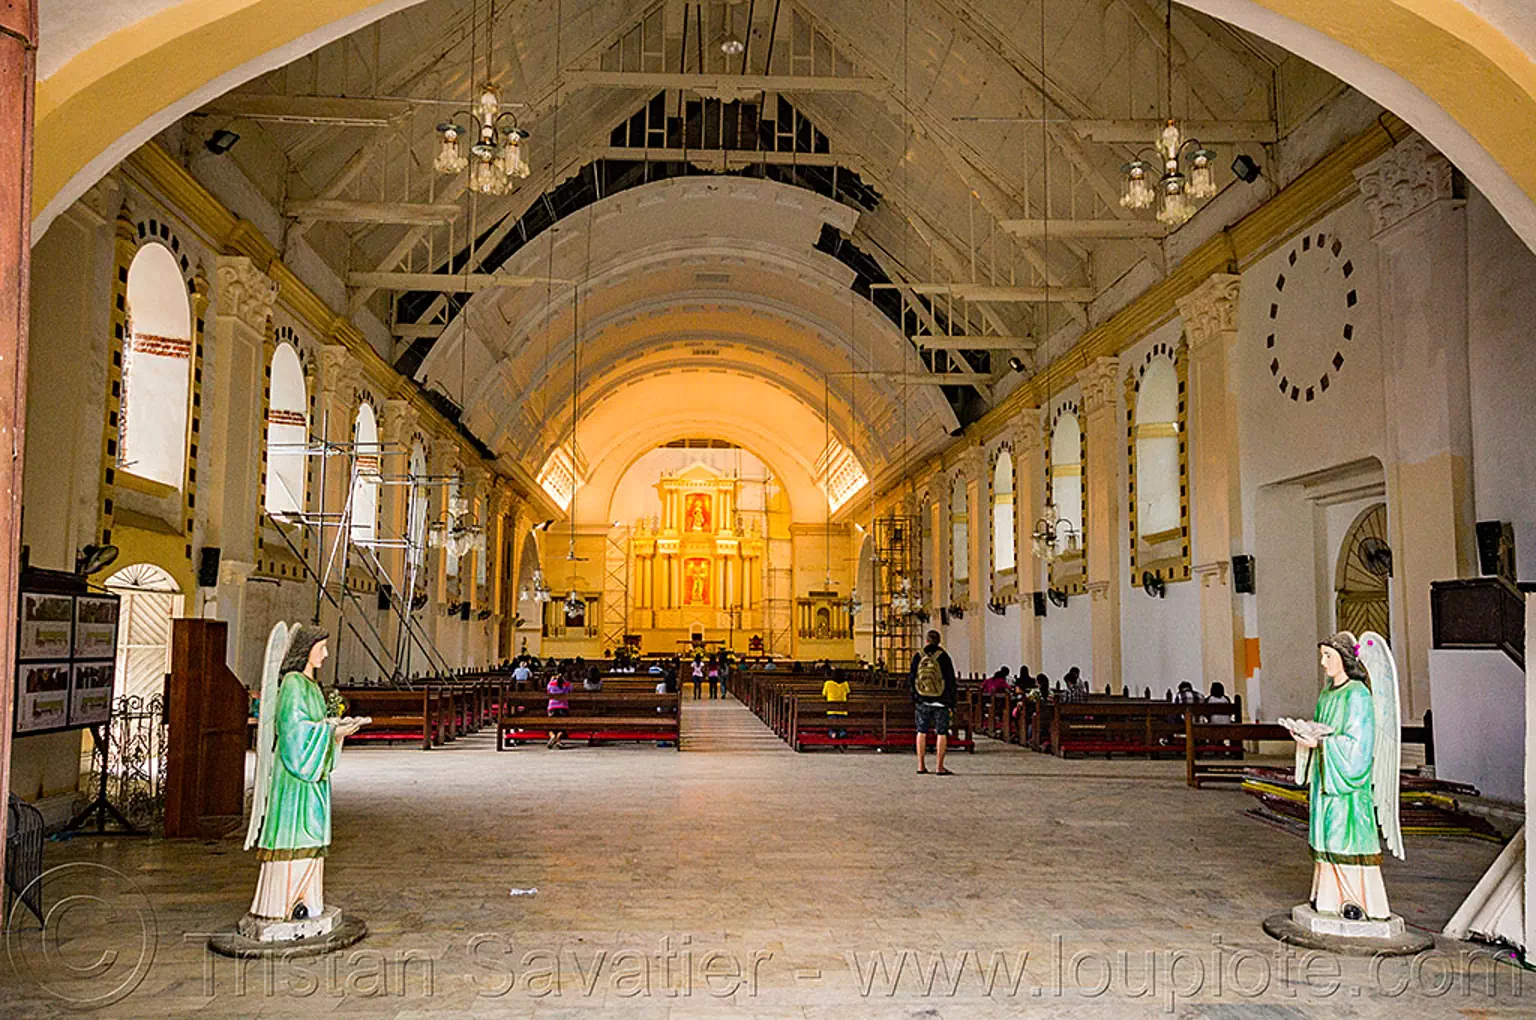 inside the cathedral of tuguegarao (philippines), cathedral, church, inside, interior, philippines, tuguegarao